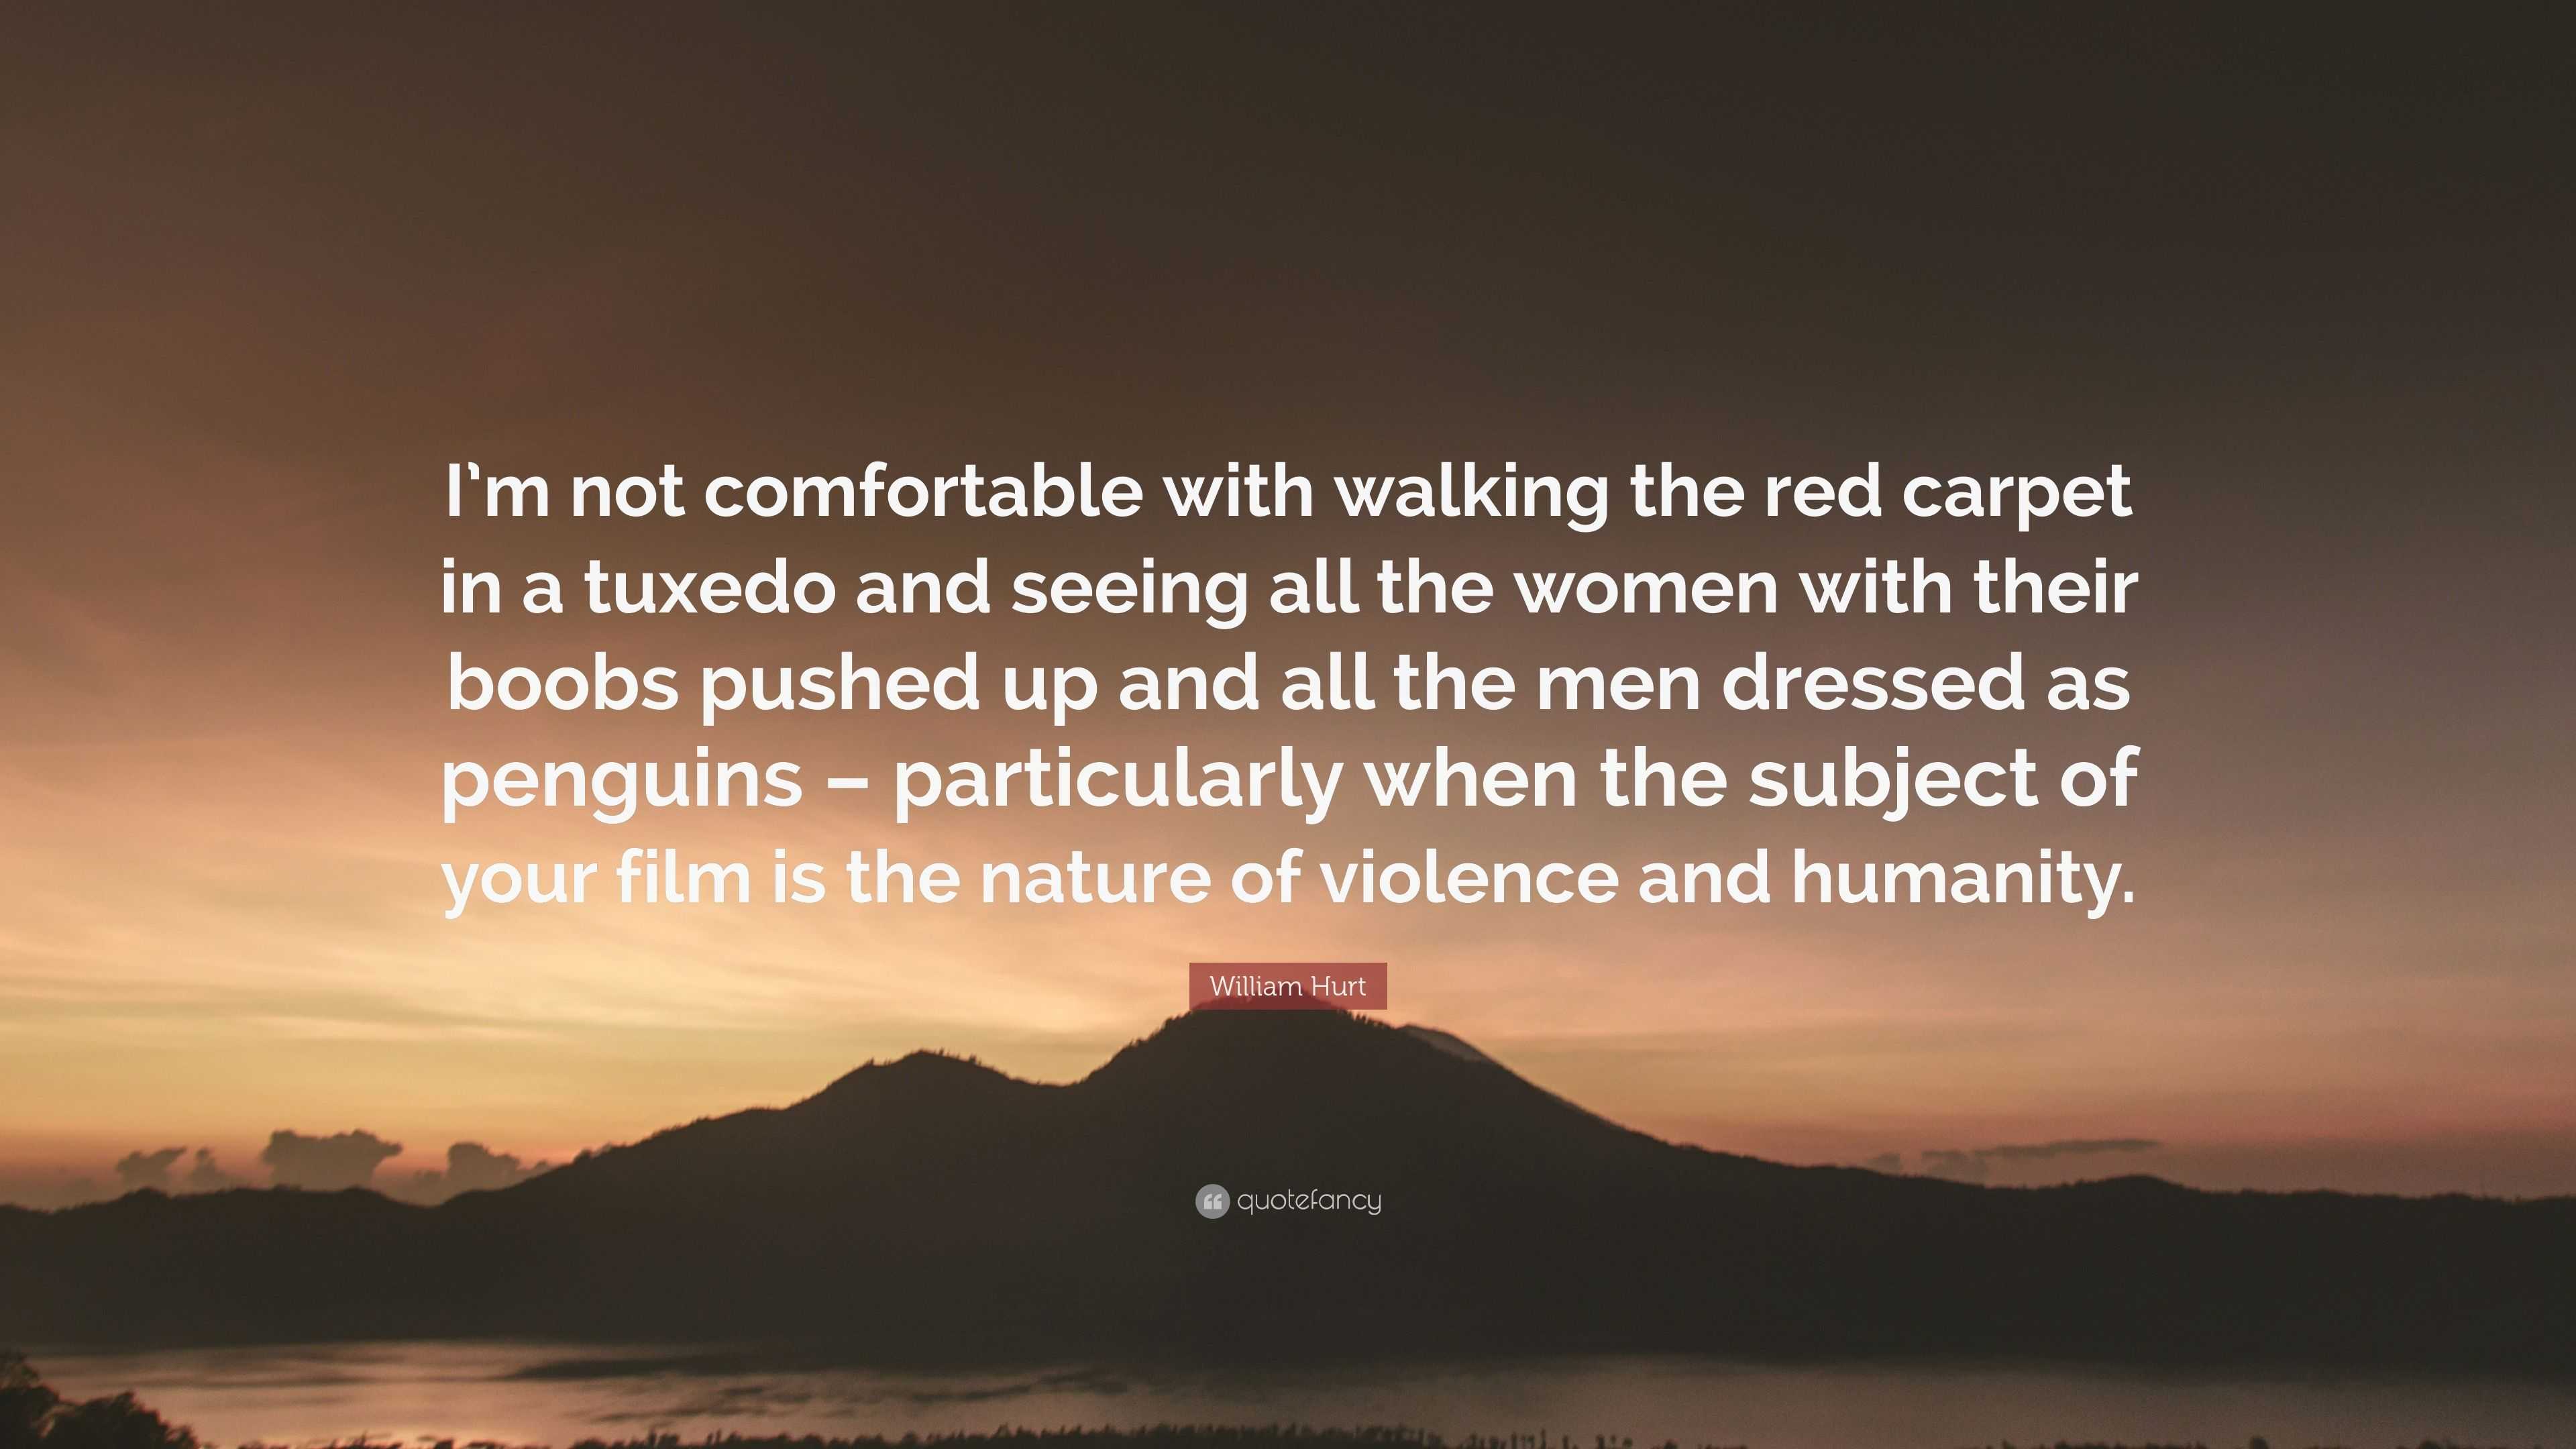 William Hurt Quote: “I'm not comfortable with walking the red